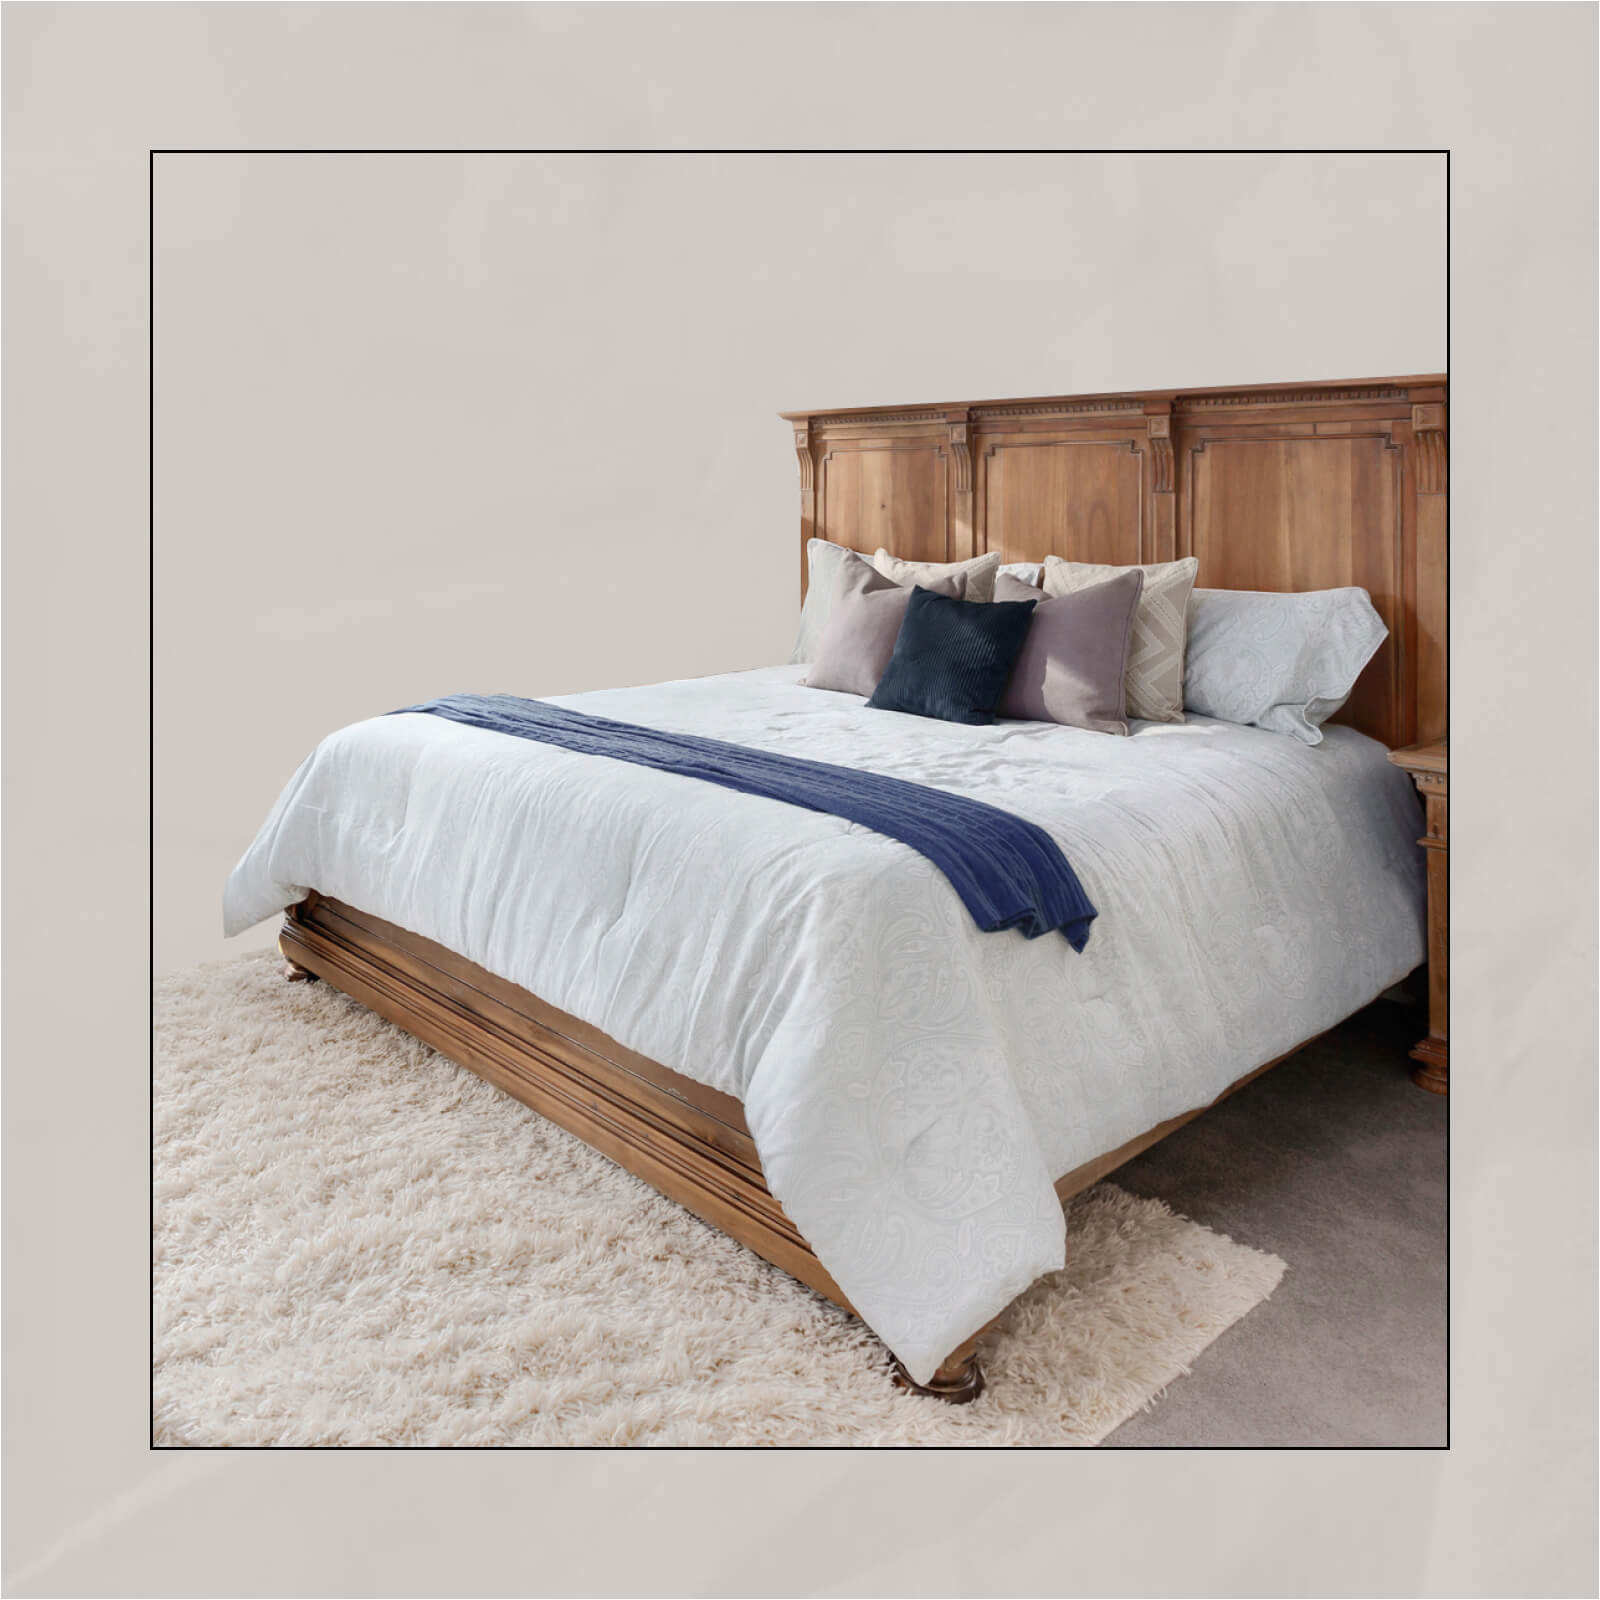 King Size Bed area Rug How to Find the Perfect Rug Size for Your King-size Bed, According …